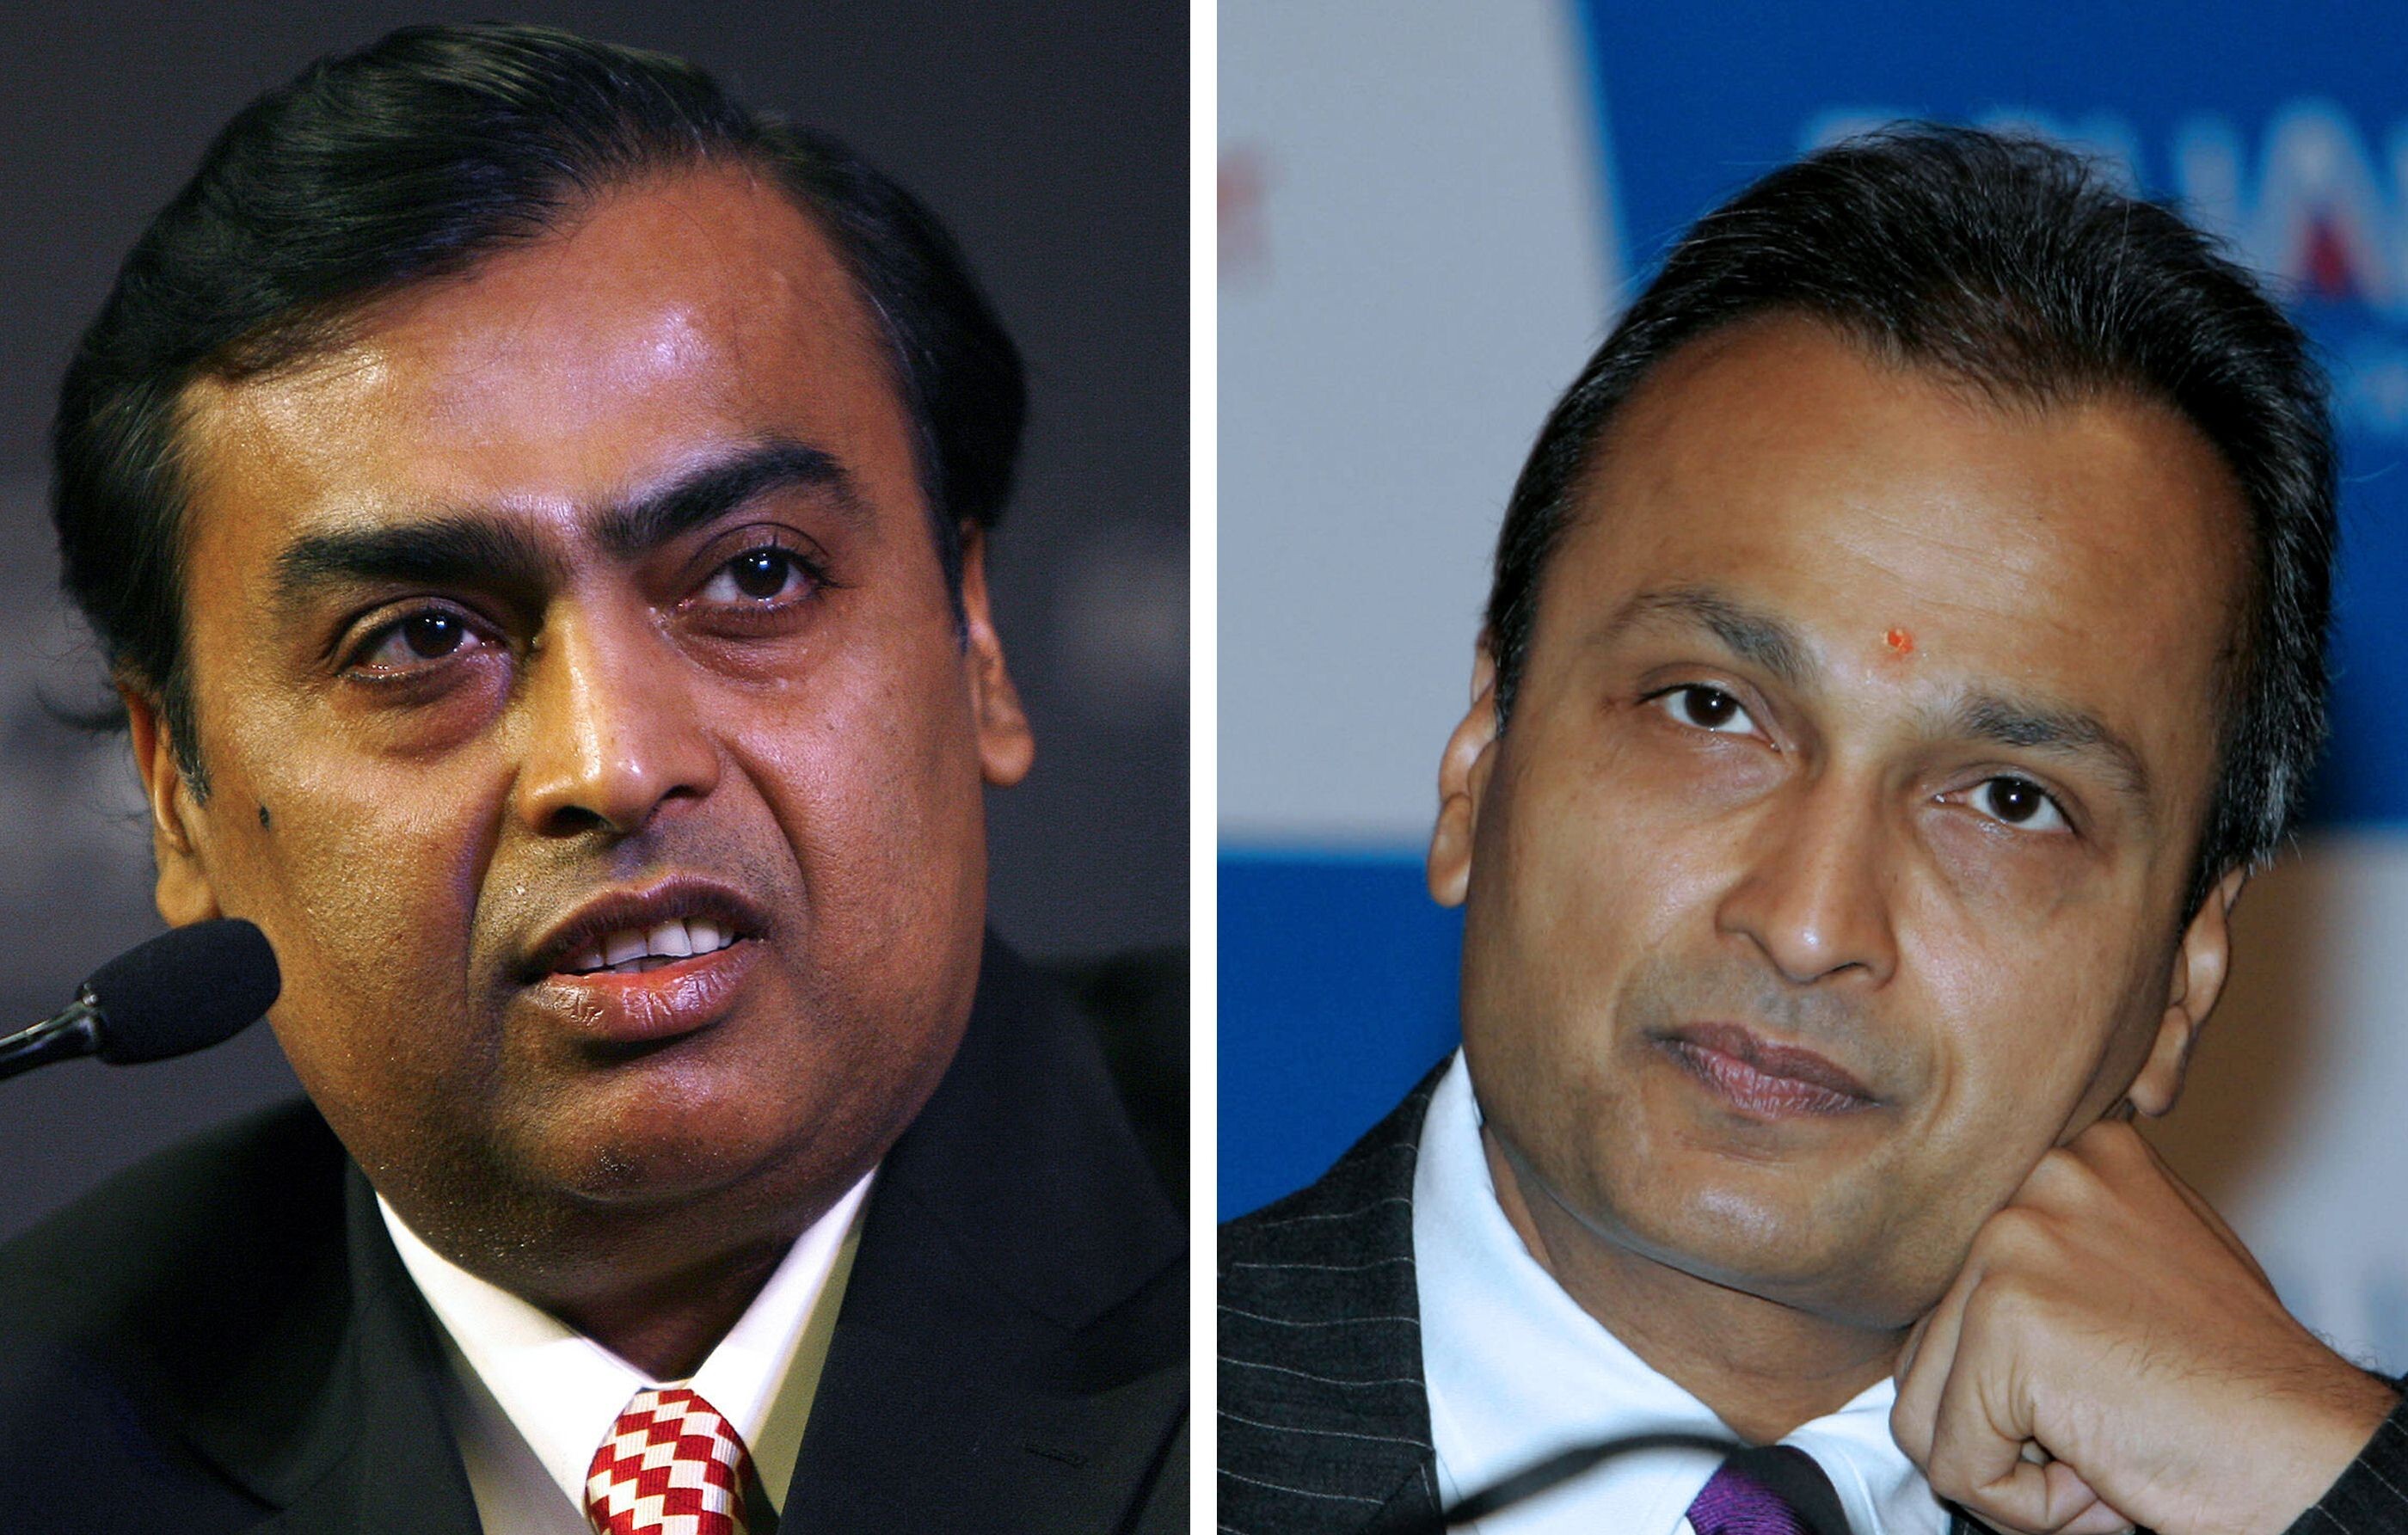 Mukesh Ambani (L) and his brother Anil Ambani (R) haven’t always seen eye to eye since their father died. He left no will, pitting them against each other for control of the family business. Photo: AFP